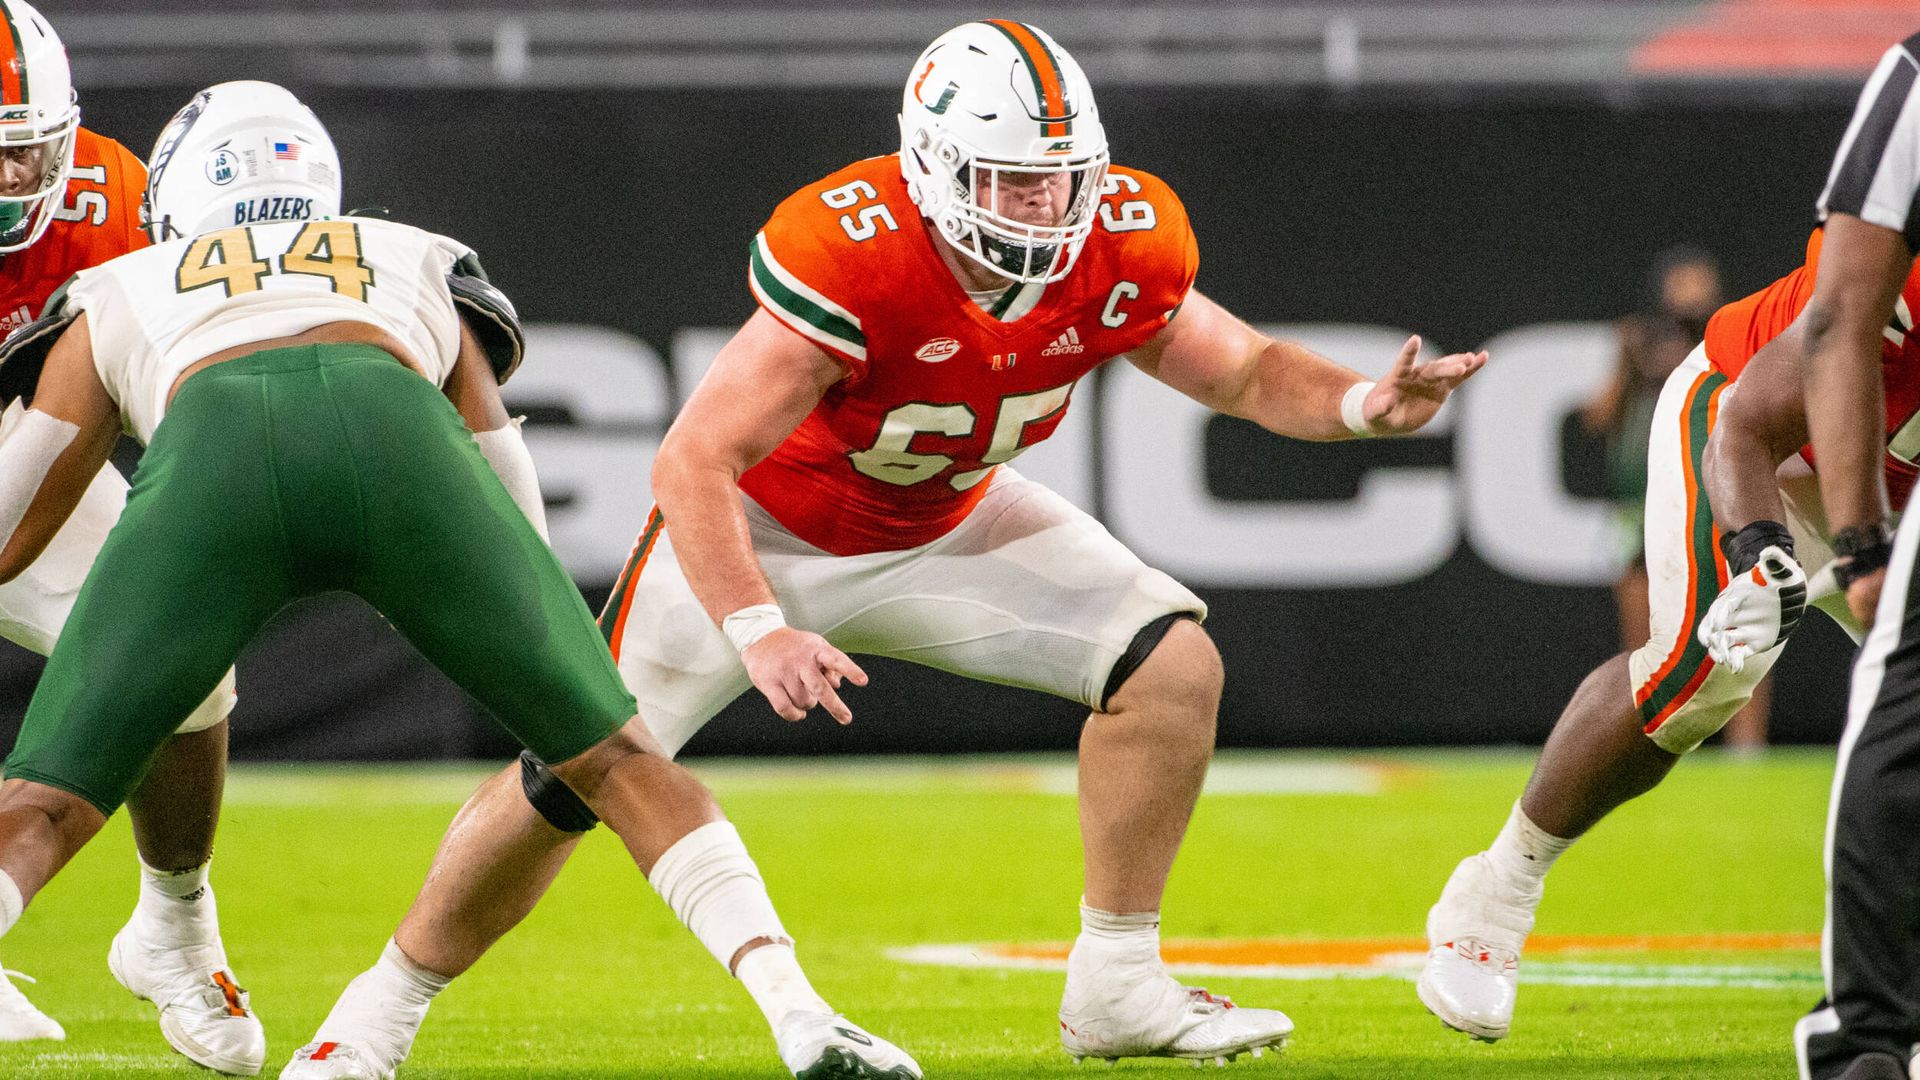 Gaynor Selected to Rimington Trophy Watch List